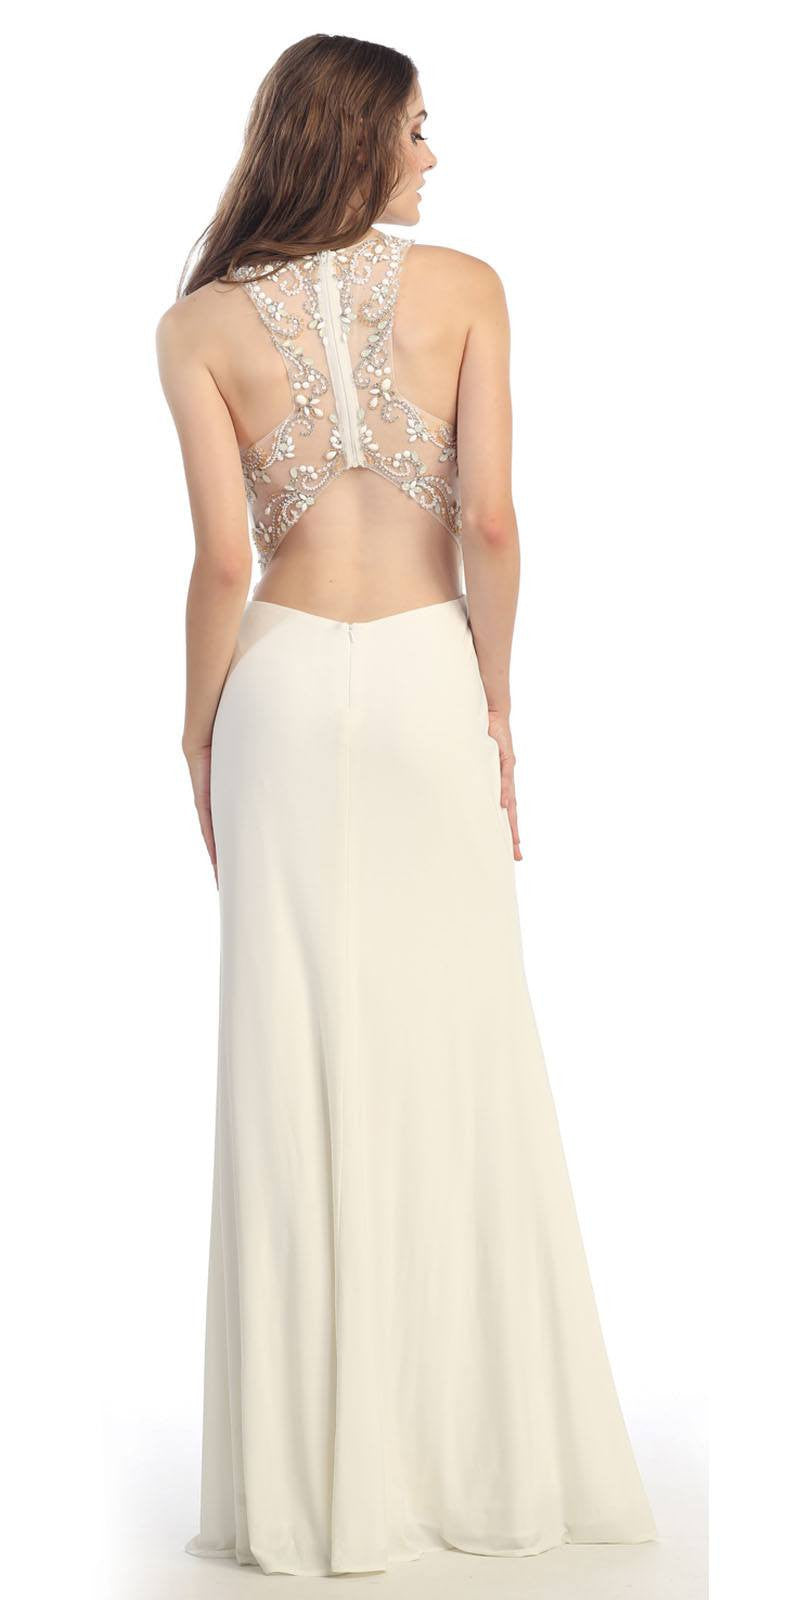 Grecian Inspired Gown Ivory Floor Length Illusion Neck Beads Back